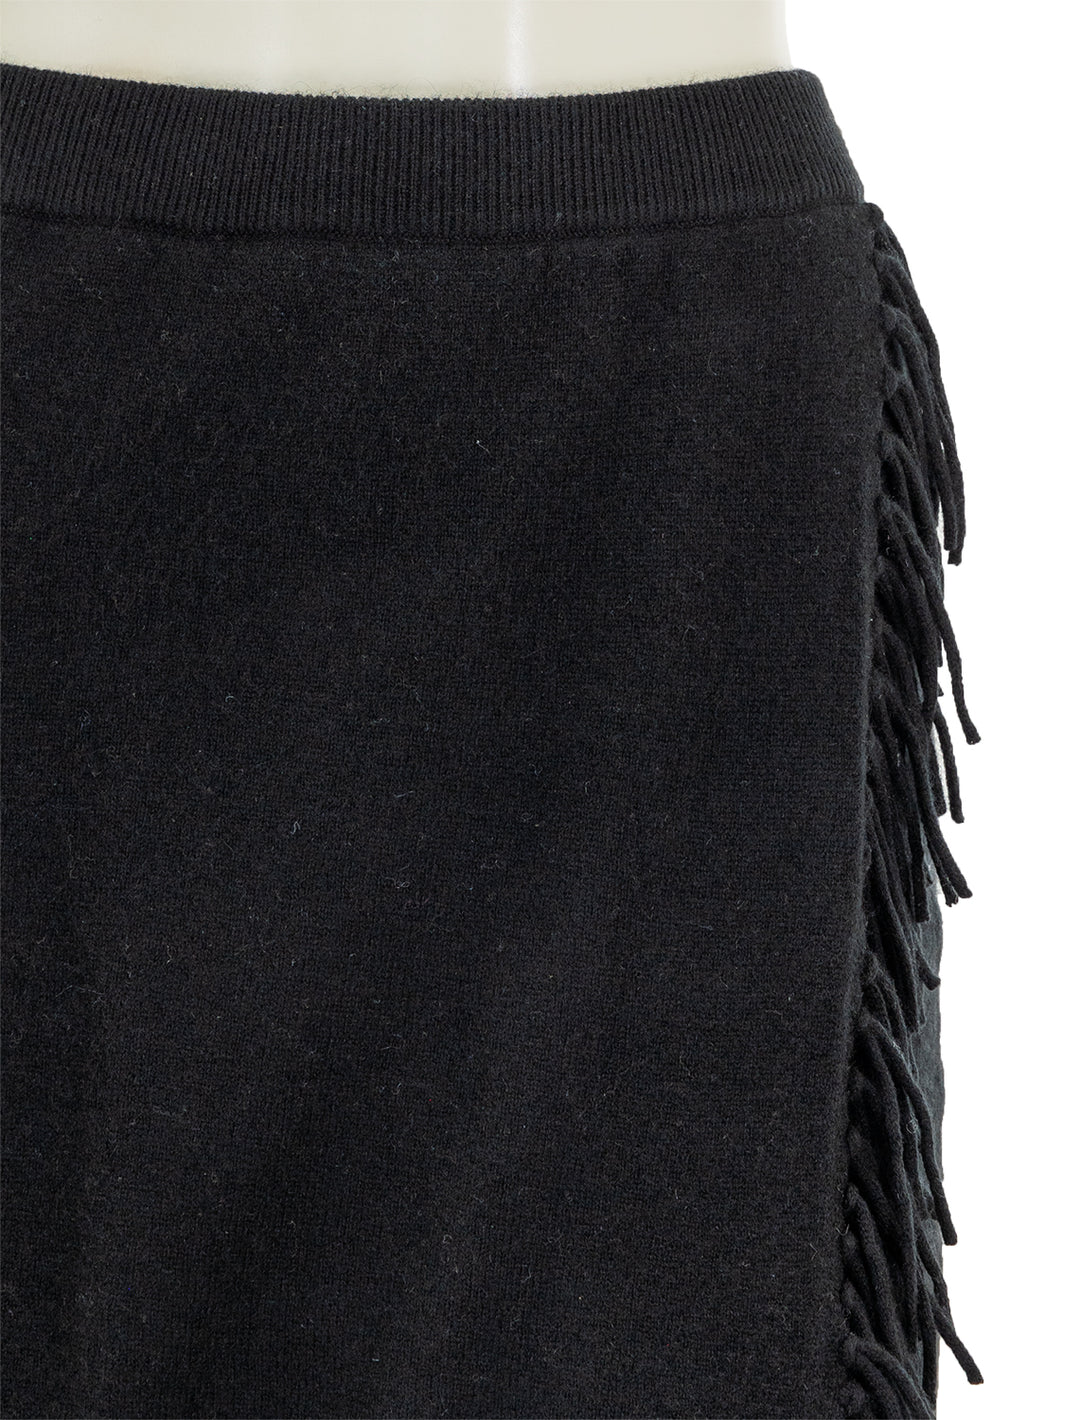 Close-up view of Minnie Rose's wrap skirt with fringe in black.